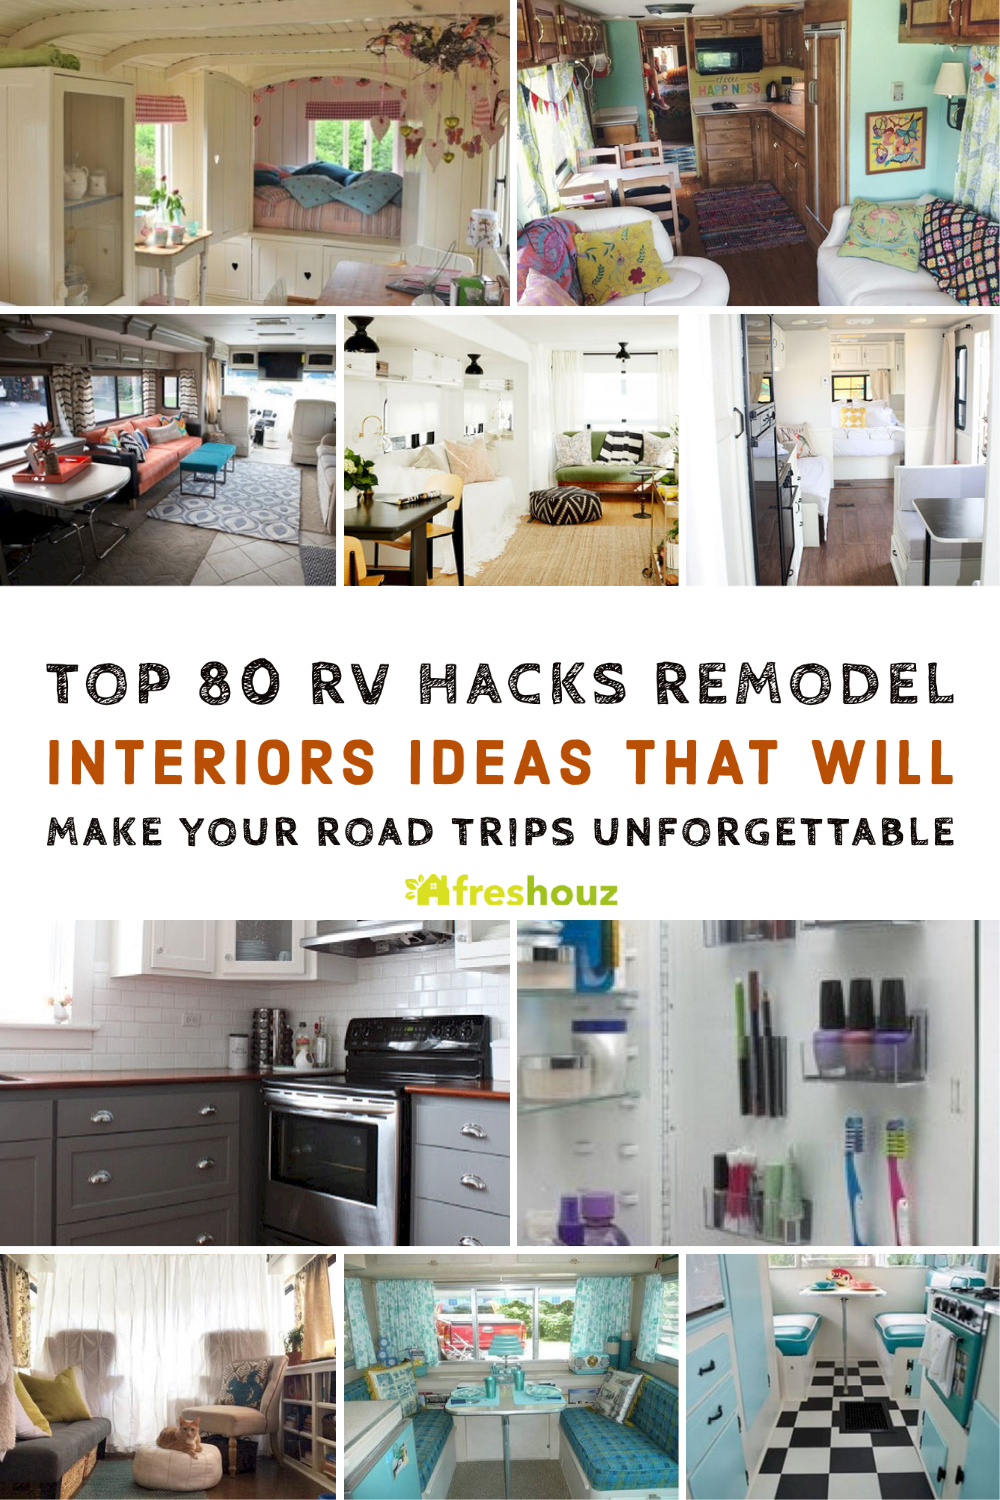 Top 80 RV Hacks Remodel Interiors Ideas That Will Make Your Road Trips Unforgettable